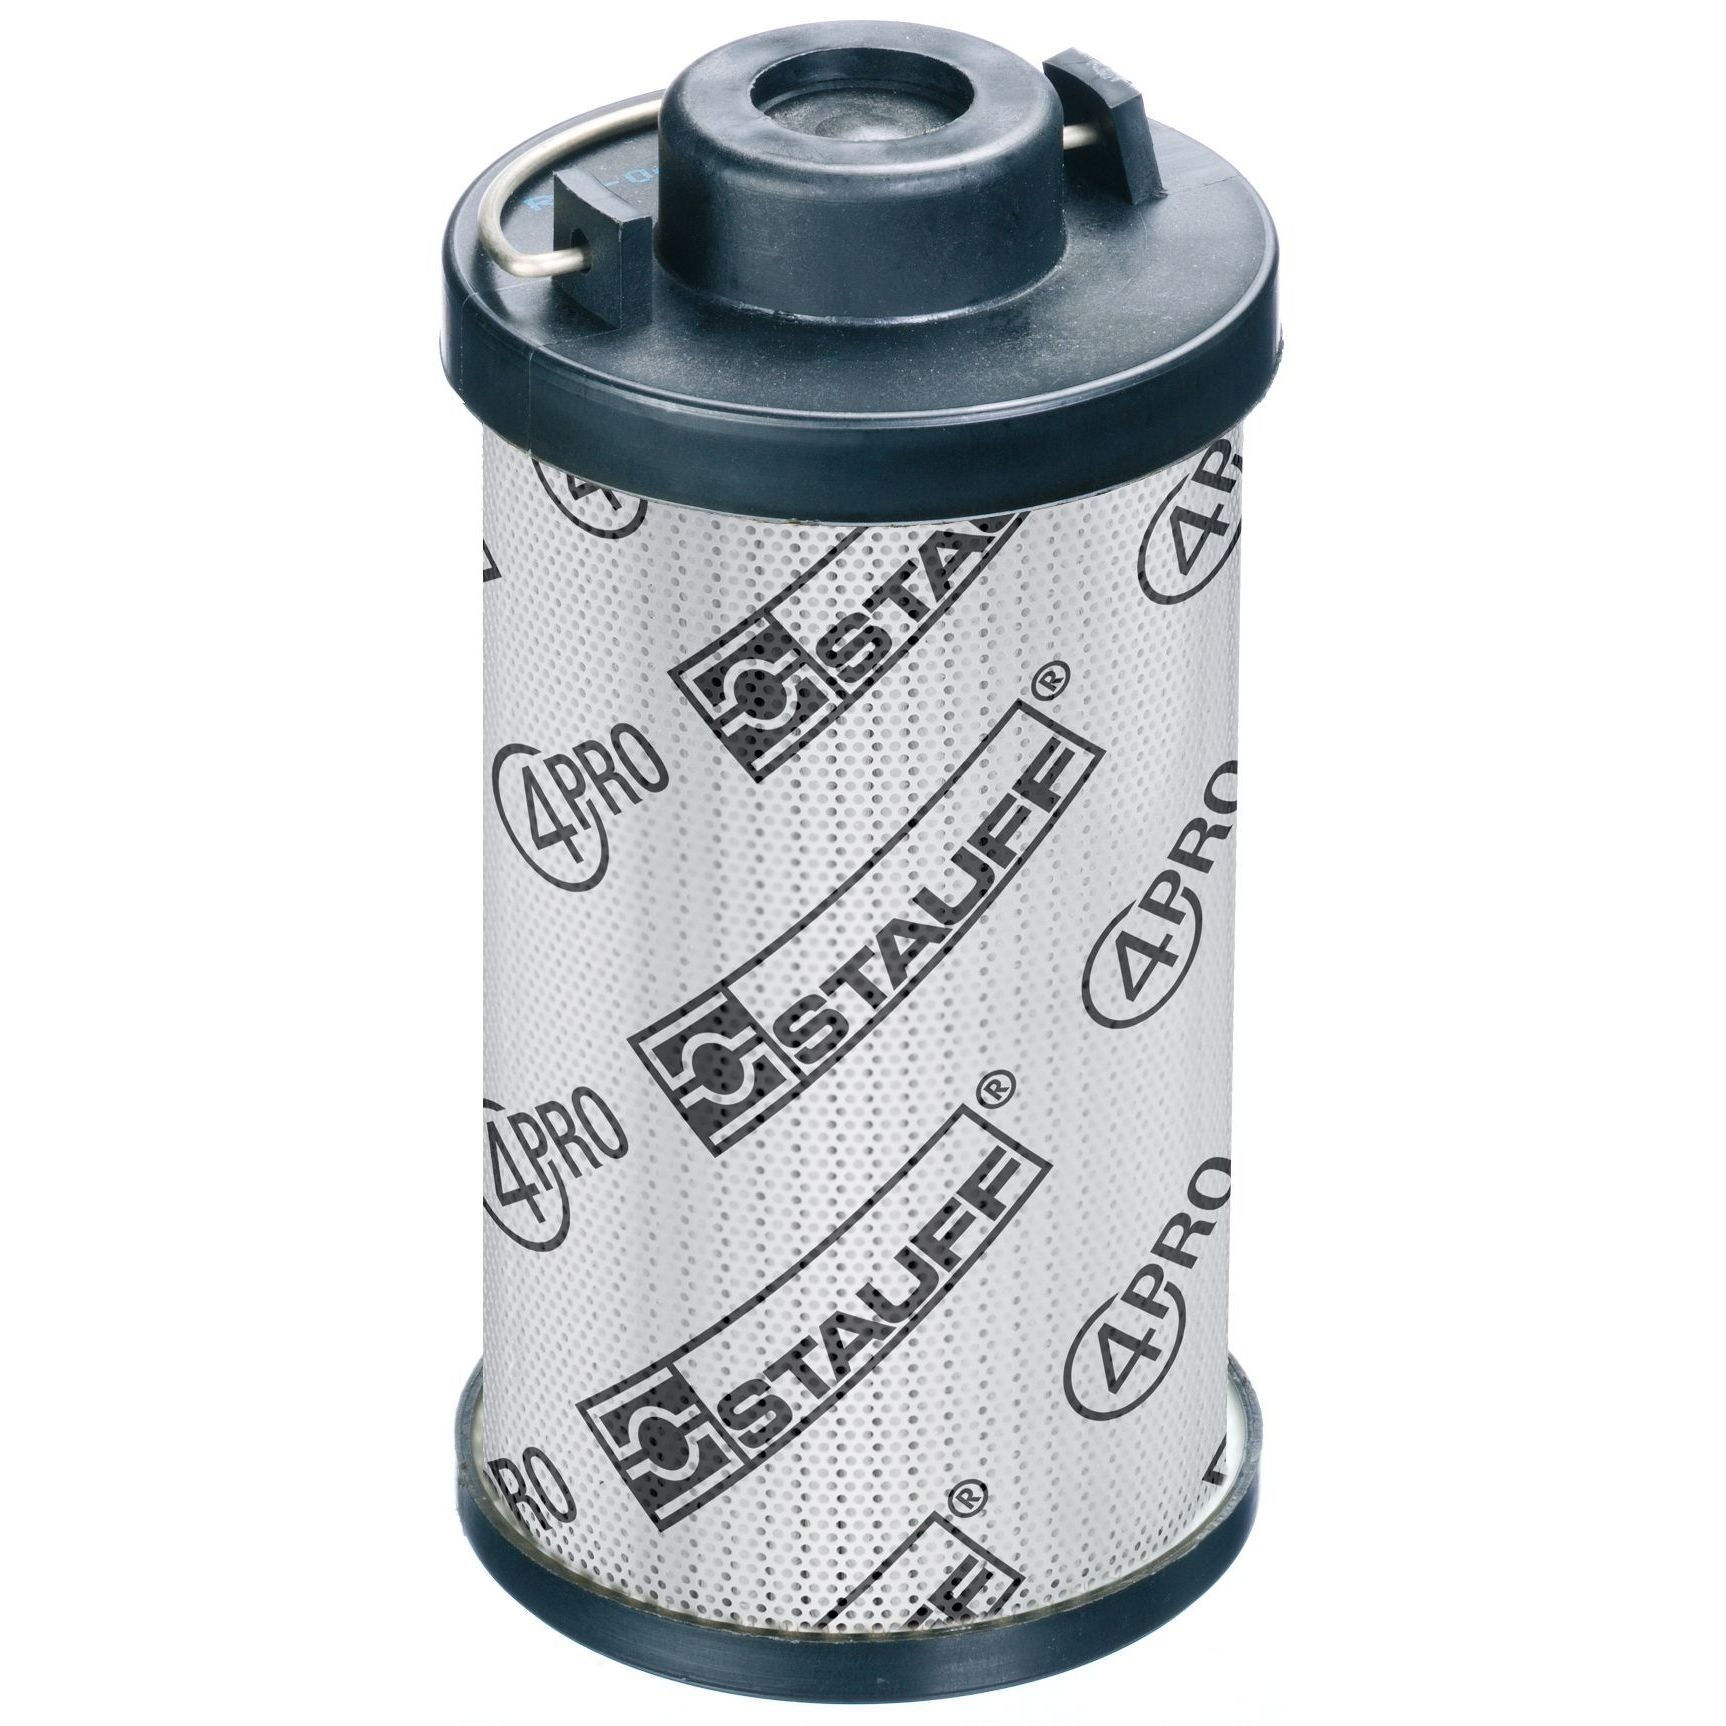 RE-030-G-05-E/4 : Stauff RF-030 Series Filter Element, 5 Micron, Synthetic, 363psi Collapse Differential, EPDM Seals